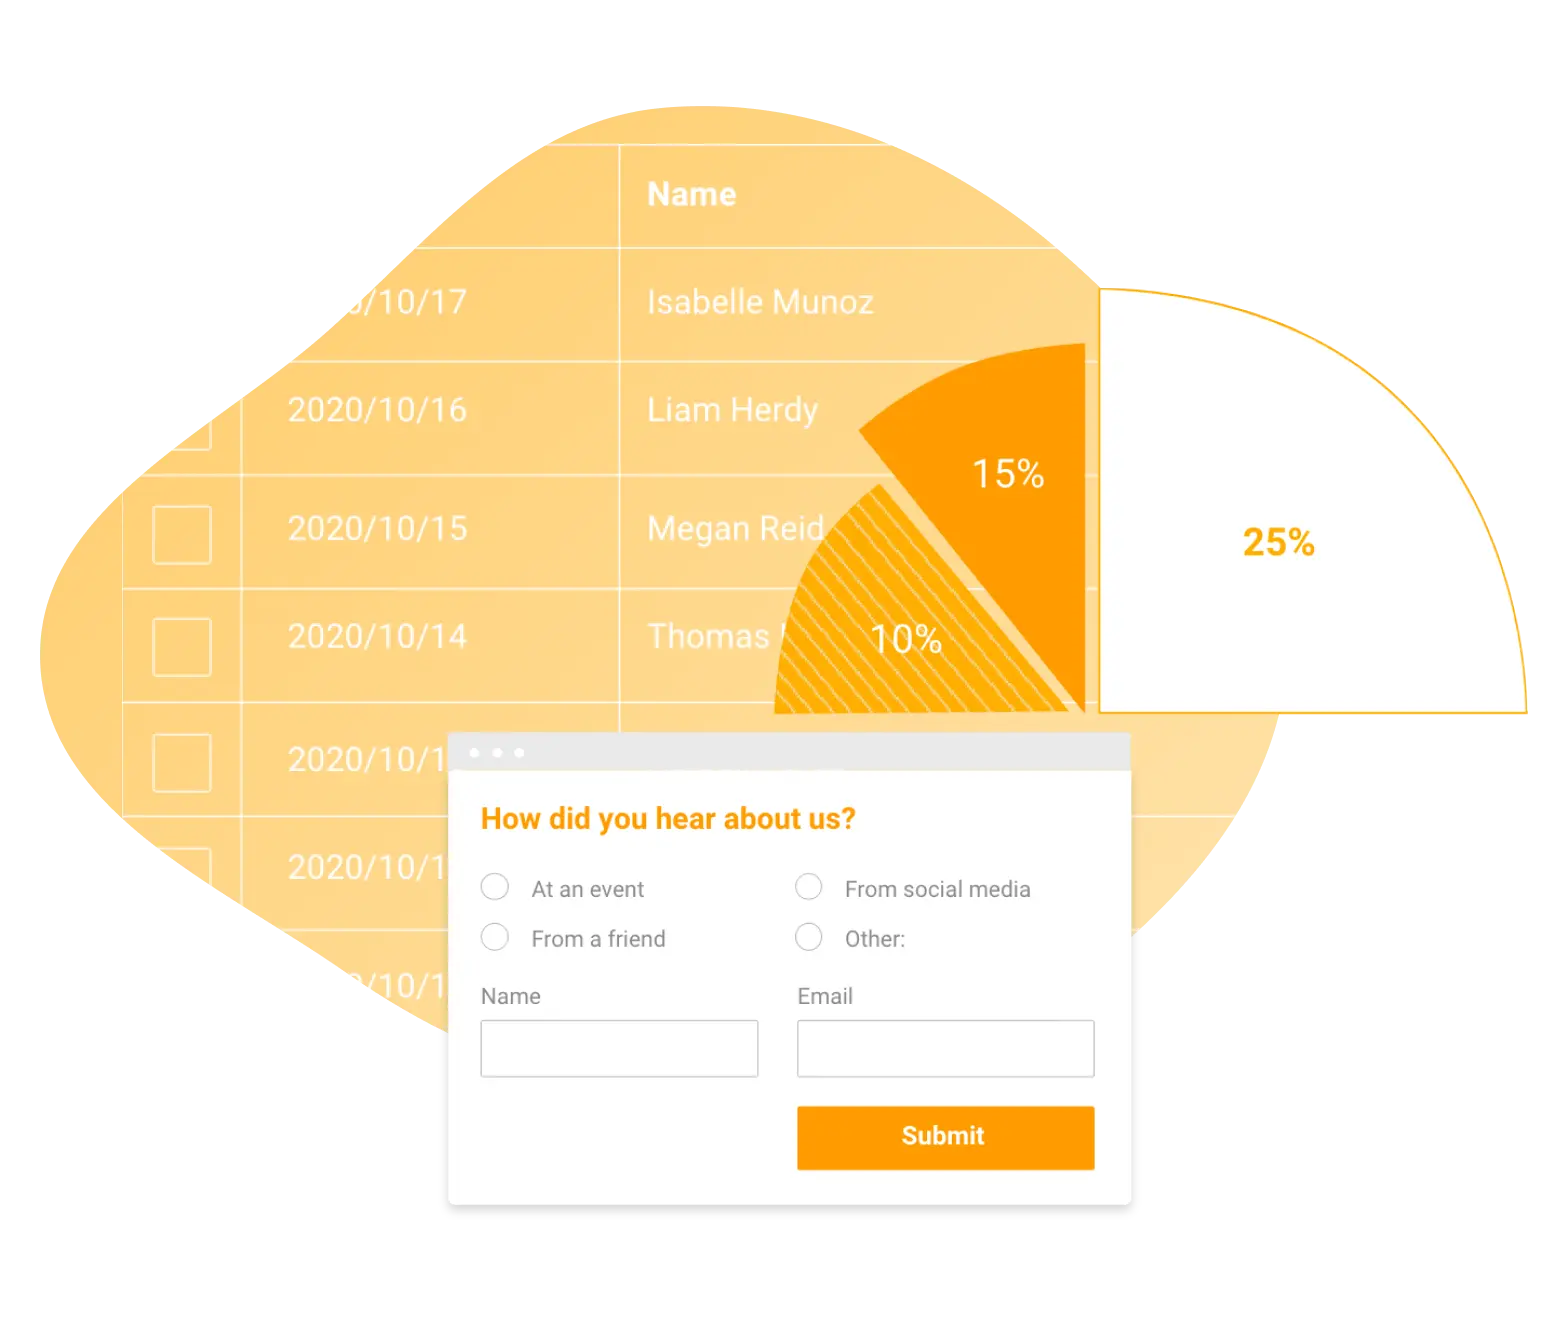 Image showing npos surveys and questionnaire results